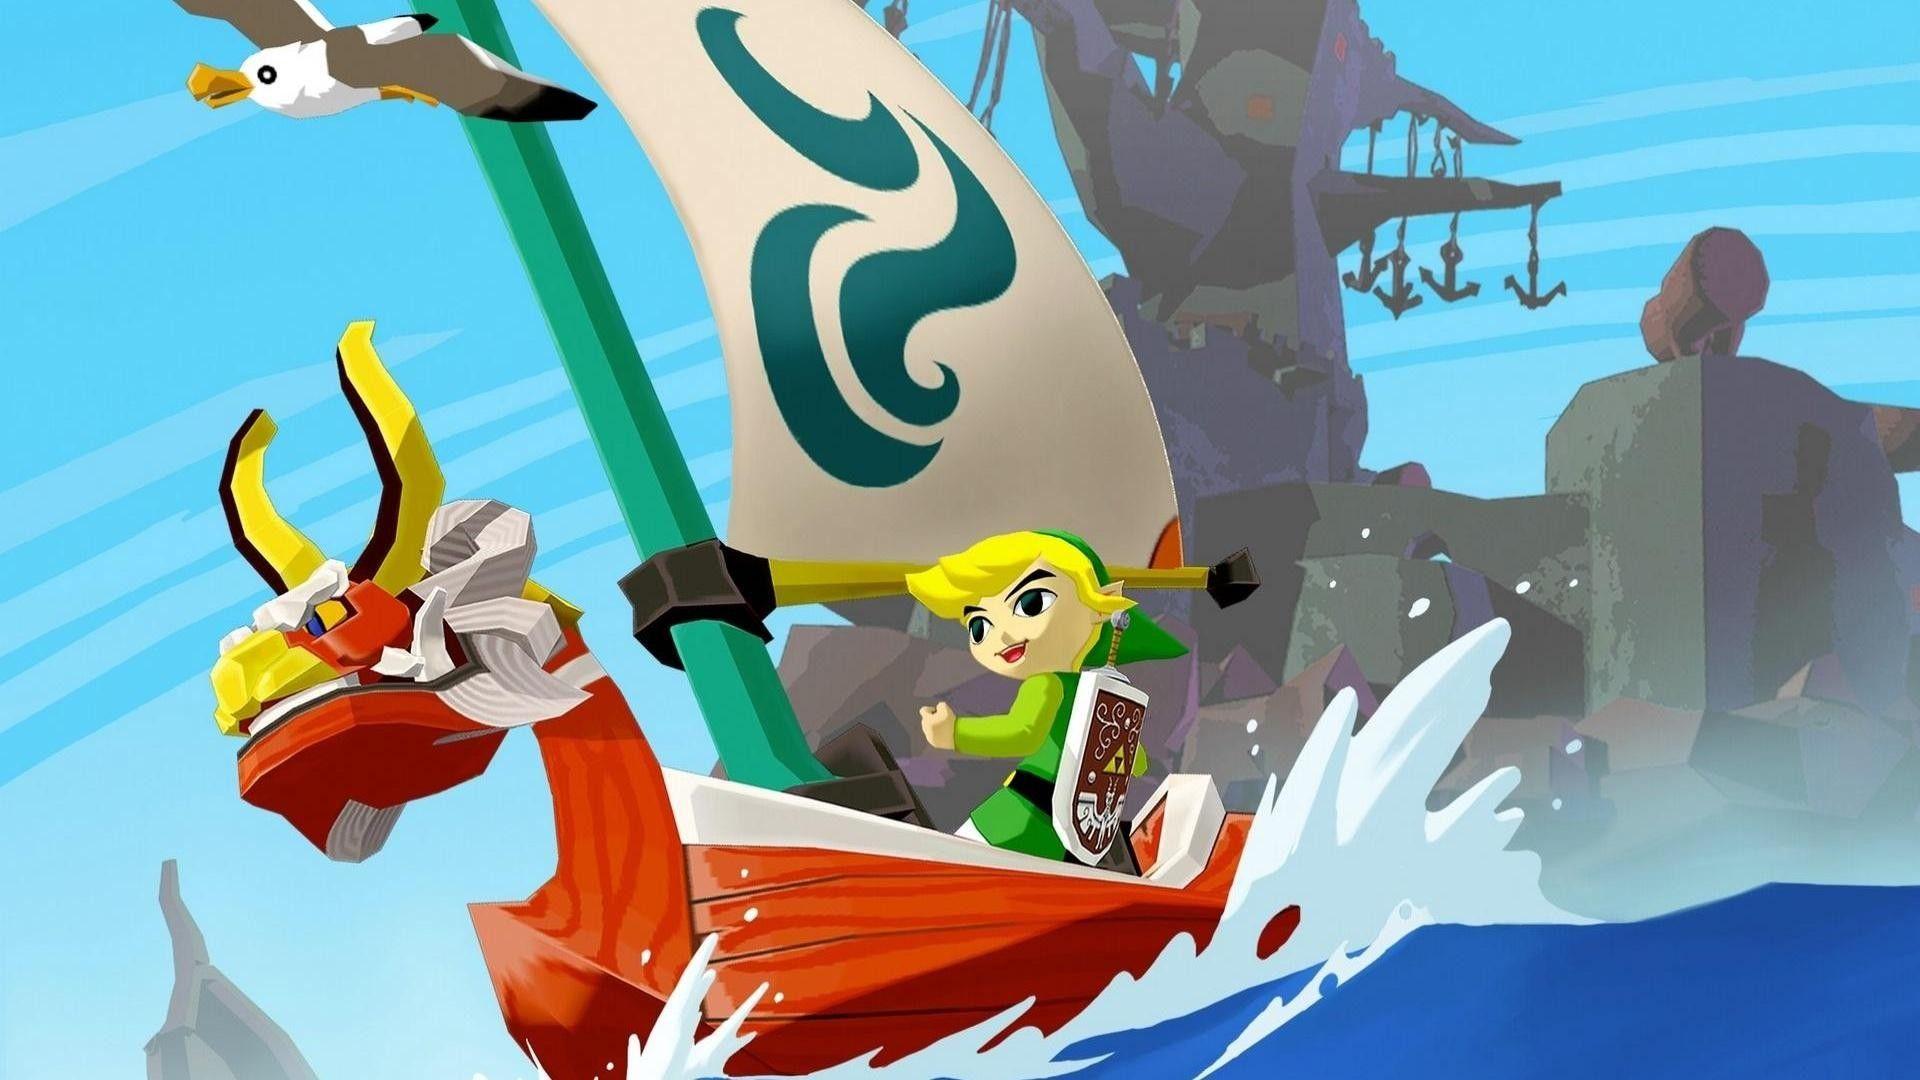 554163 1920x1080 widescreen backgrounds the legend of zelda the wind waker   Rare Gallery HD Wallpapers